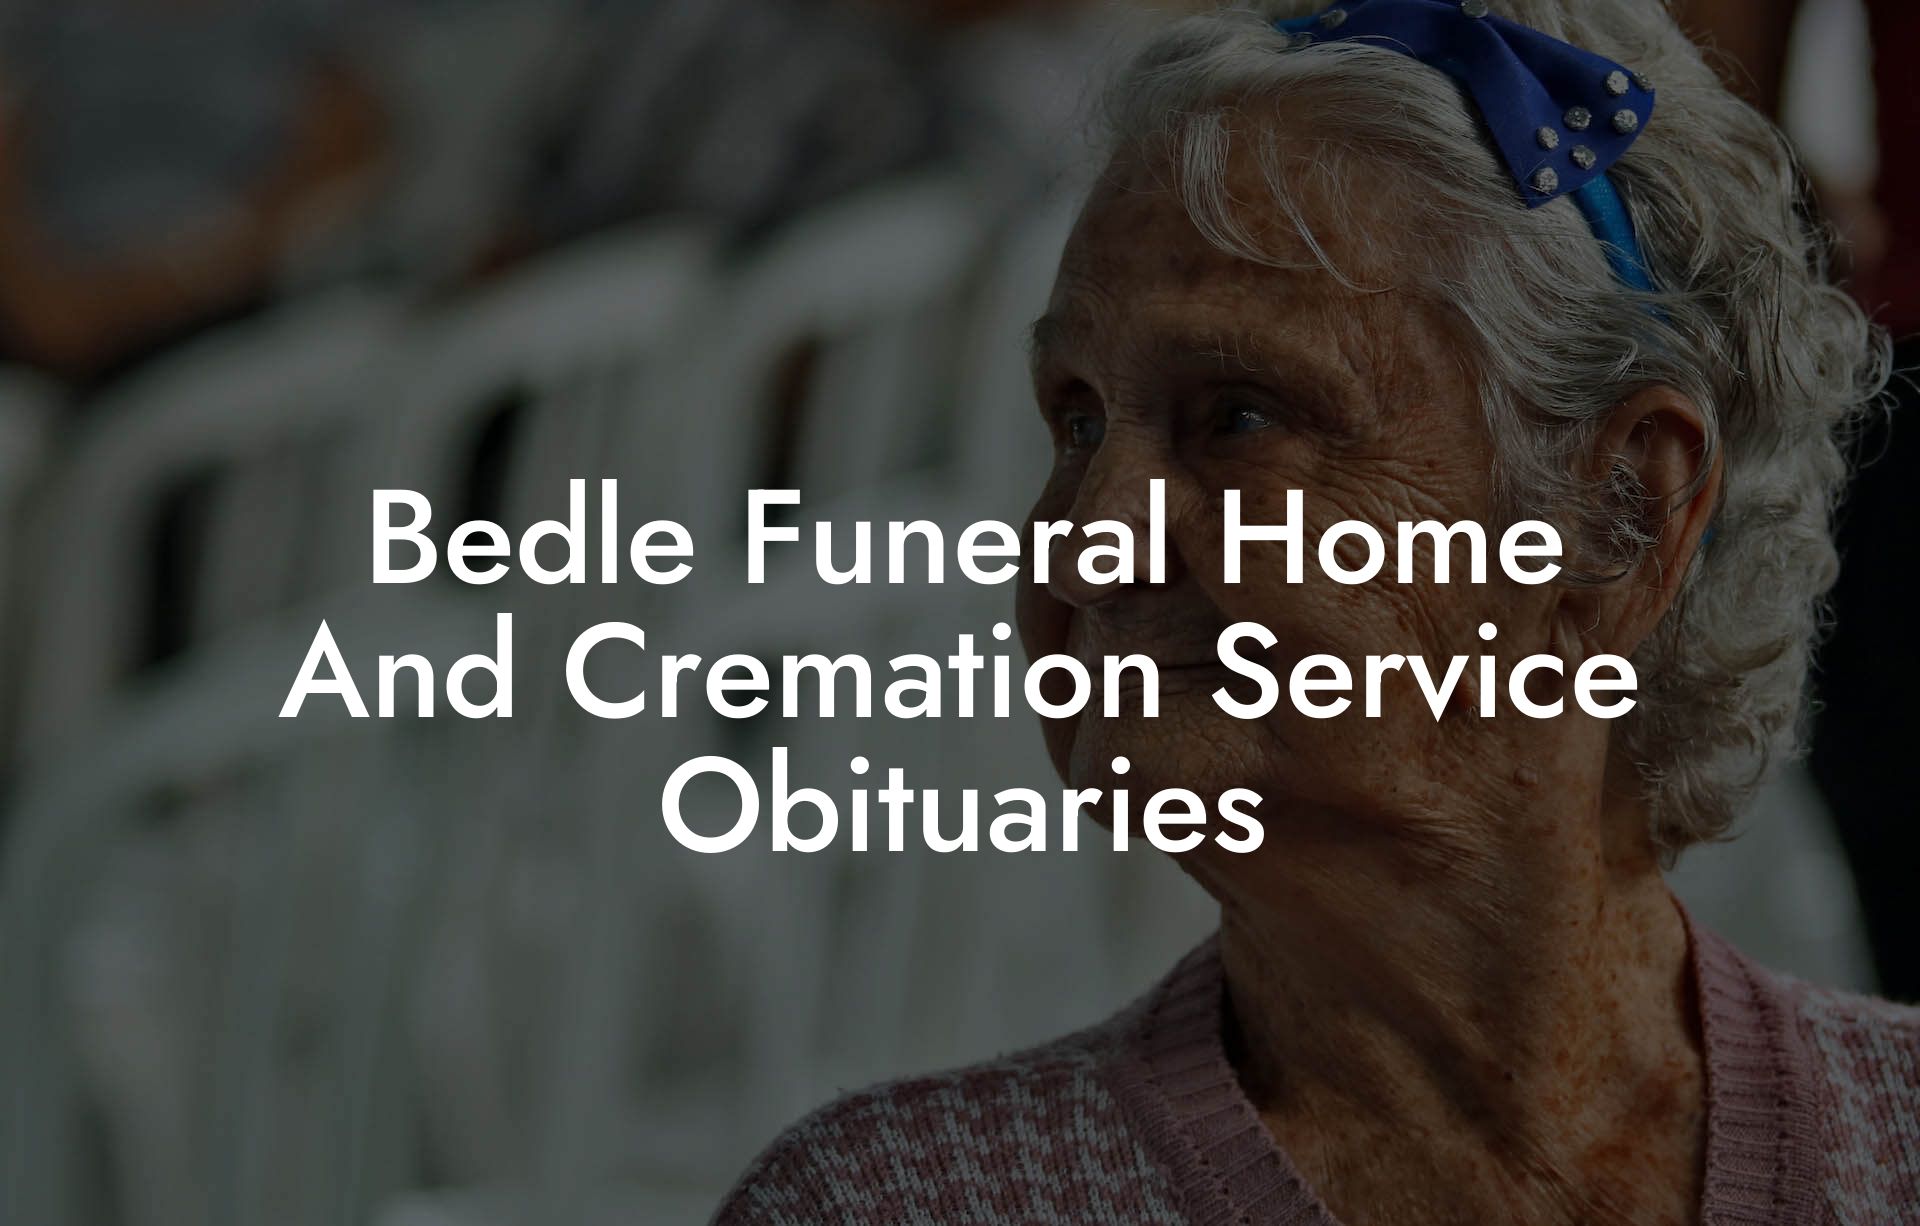 Bedle Funeral Home And Cremation Service Obituaries